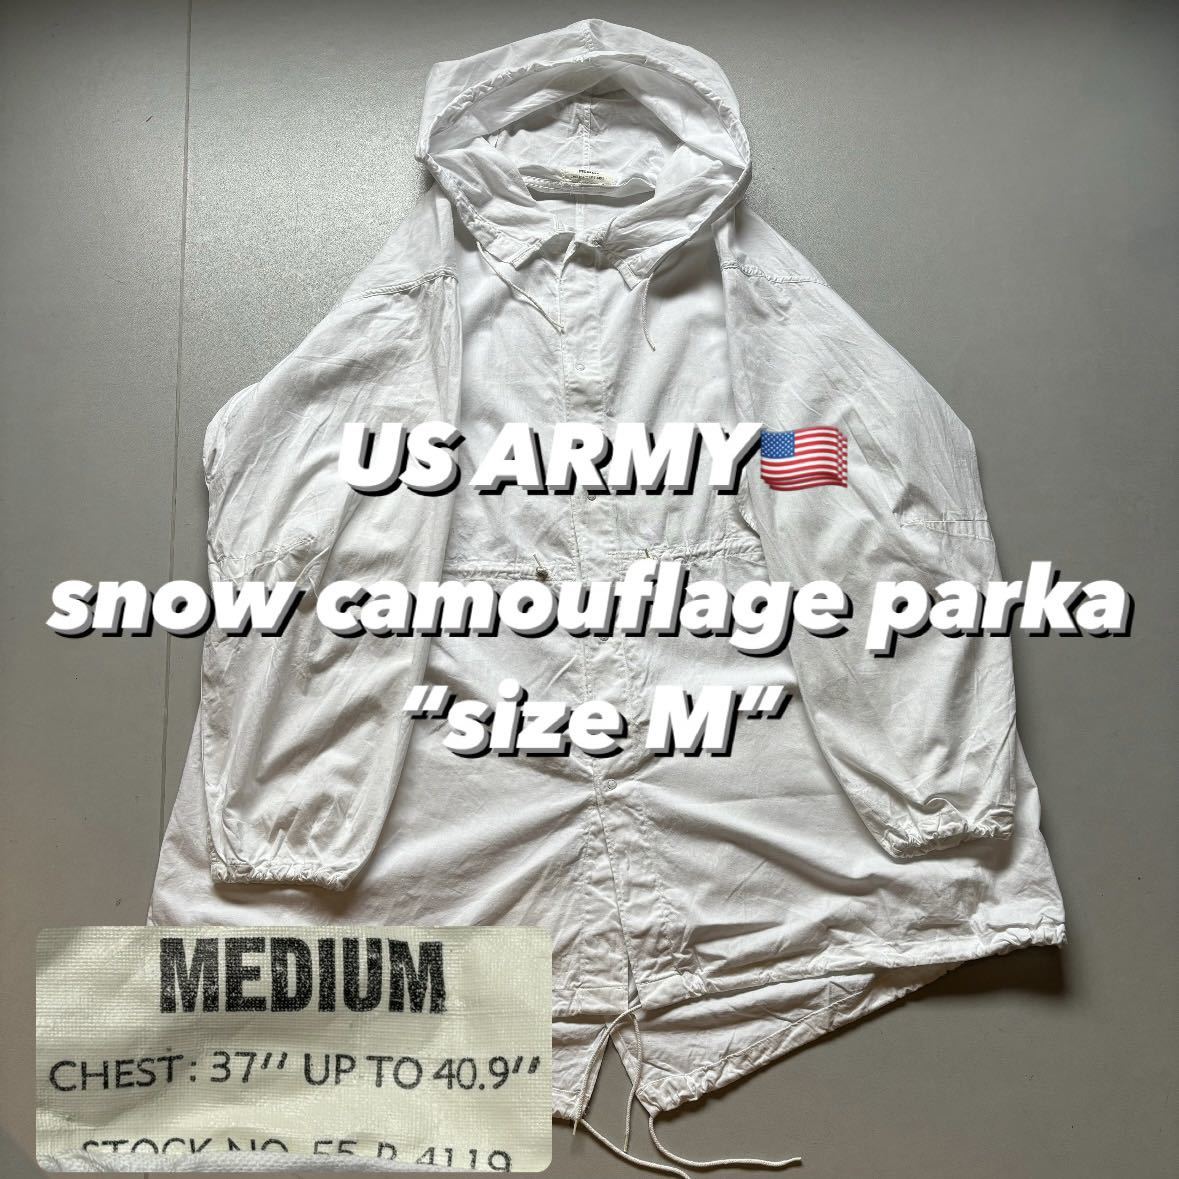 US army snow camouflage parka “size M” アメリカ軍 スノーカモパーカー 山岳部隊